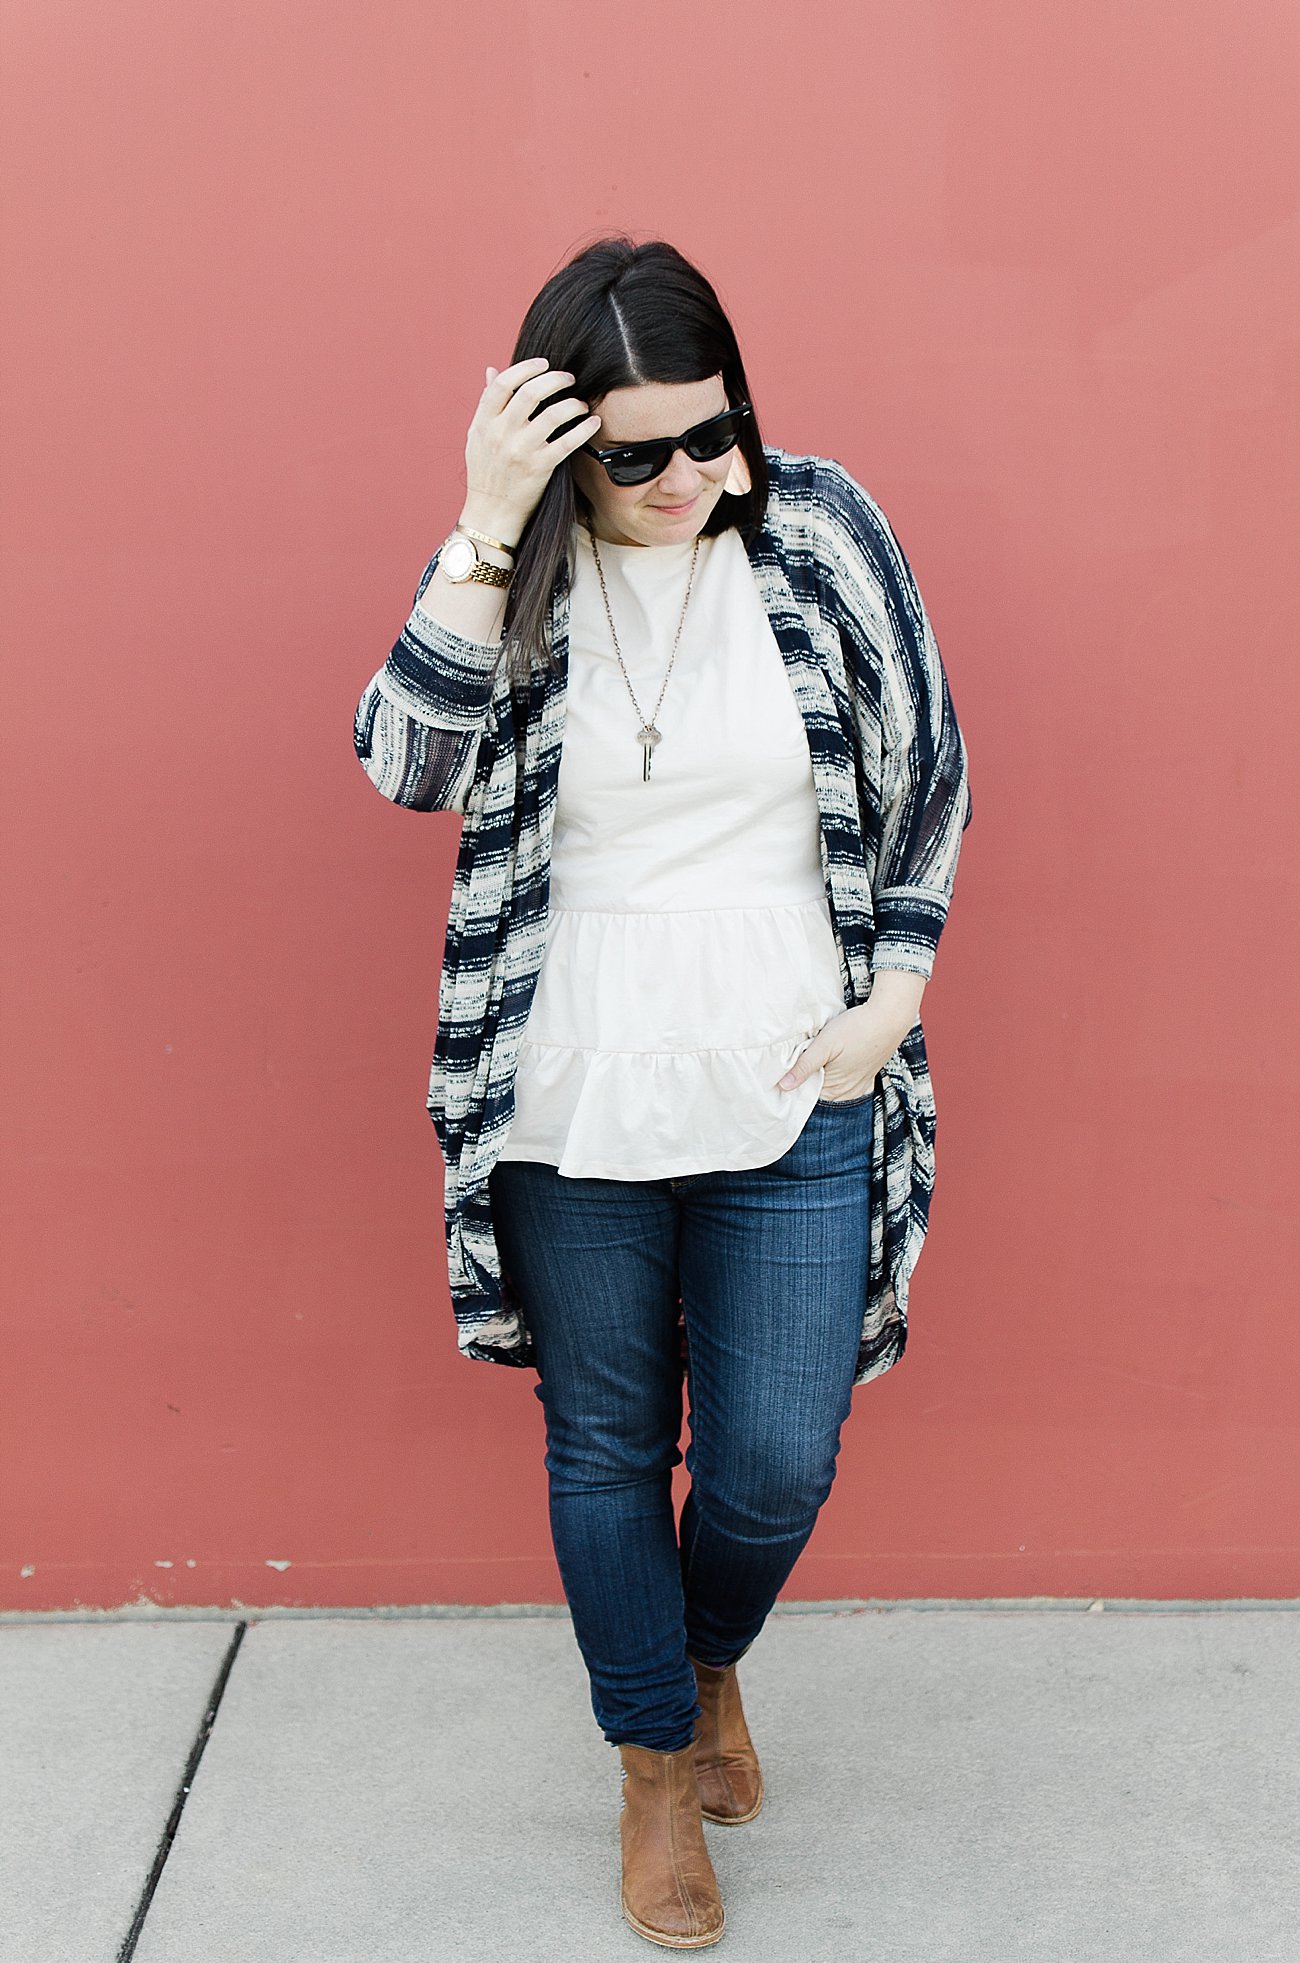 The Giving Keys, The Flourish Market, Elegantees, Paige Denim, The Root Collective booties | Ethical Fashion, fall style (8)